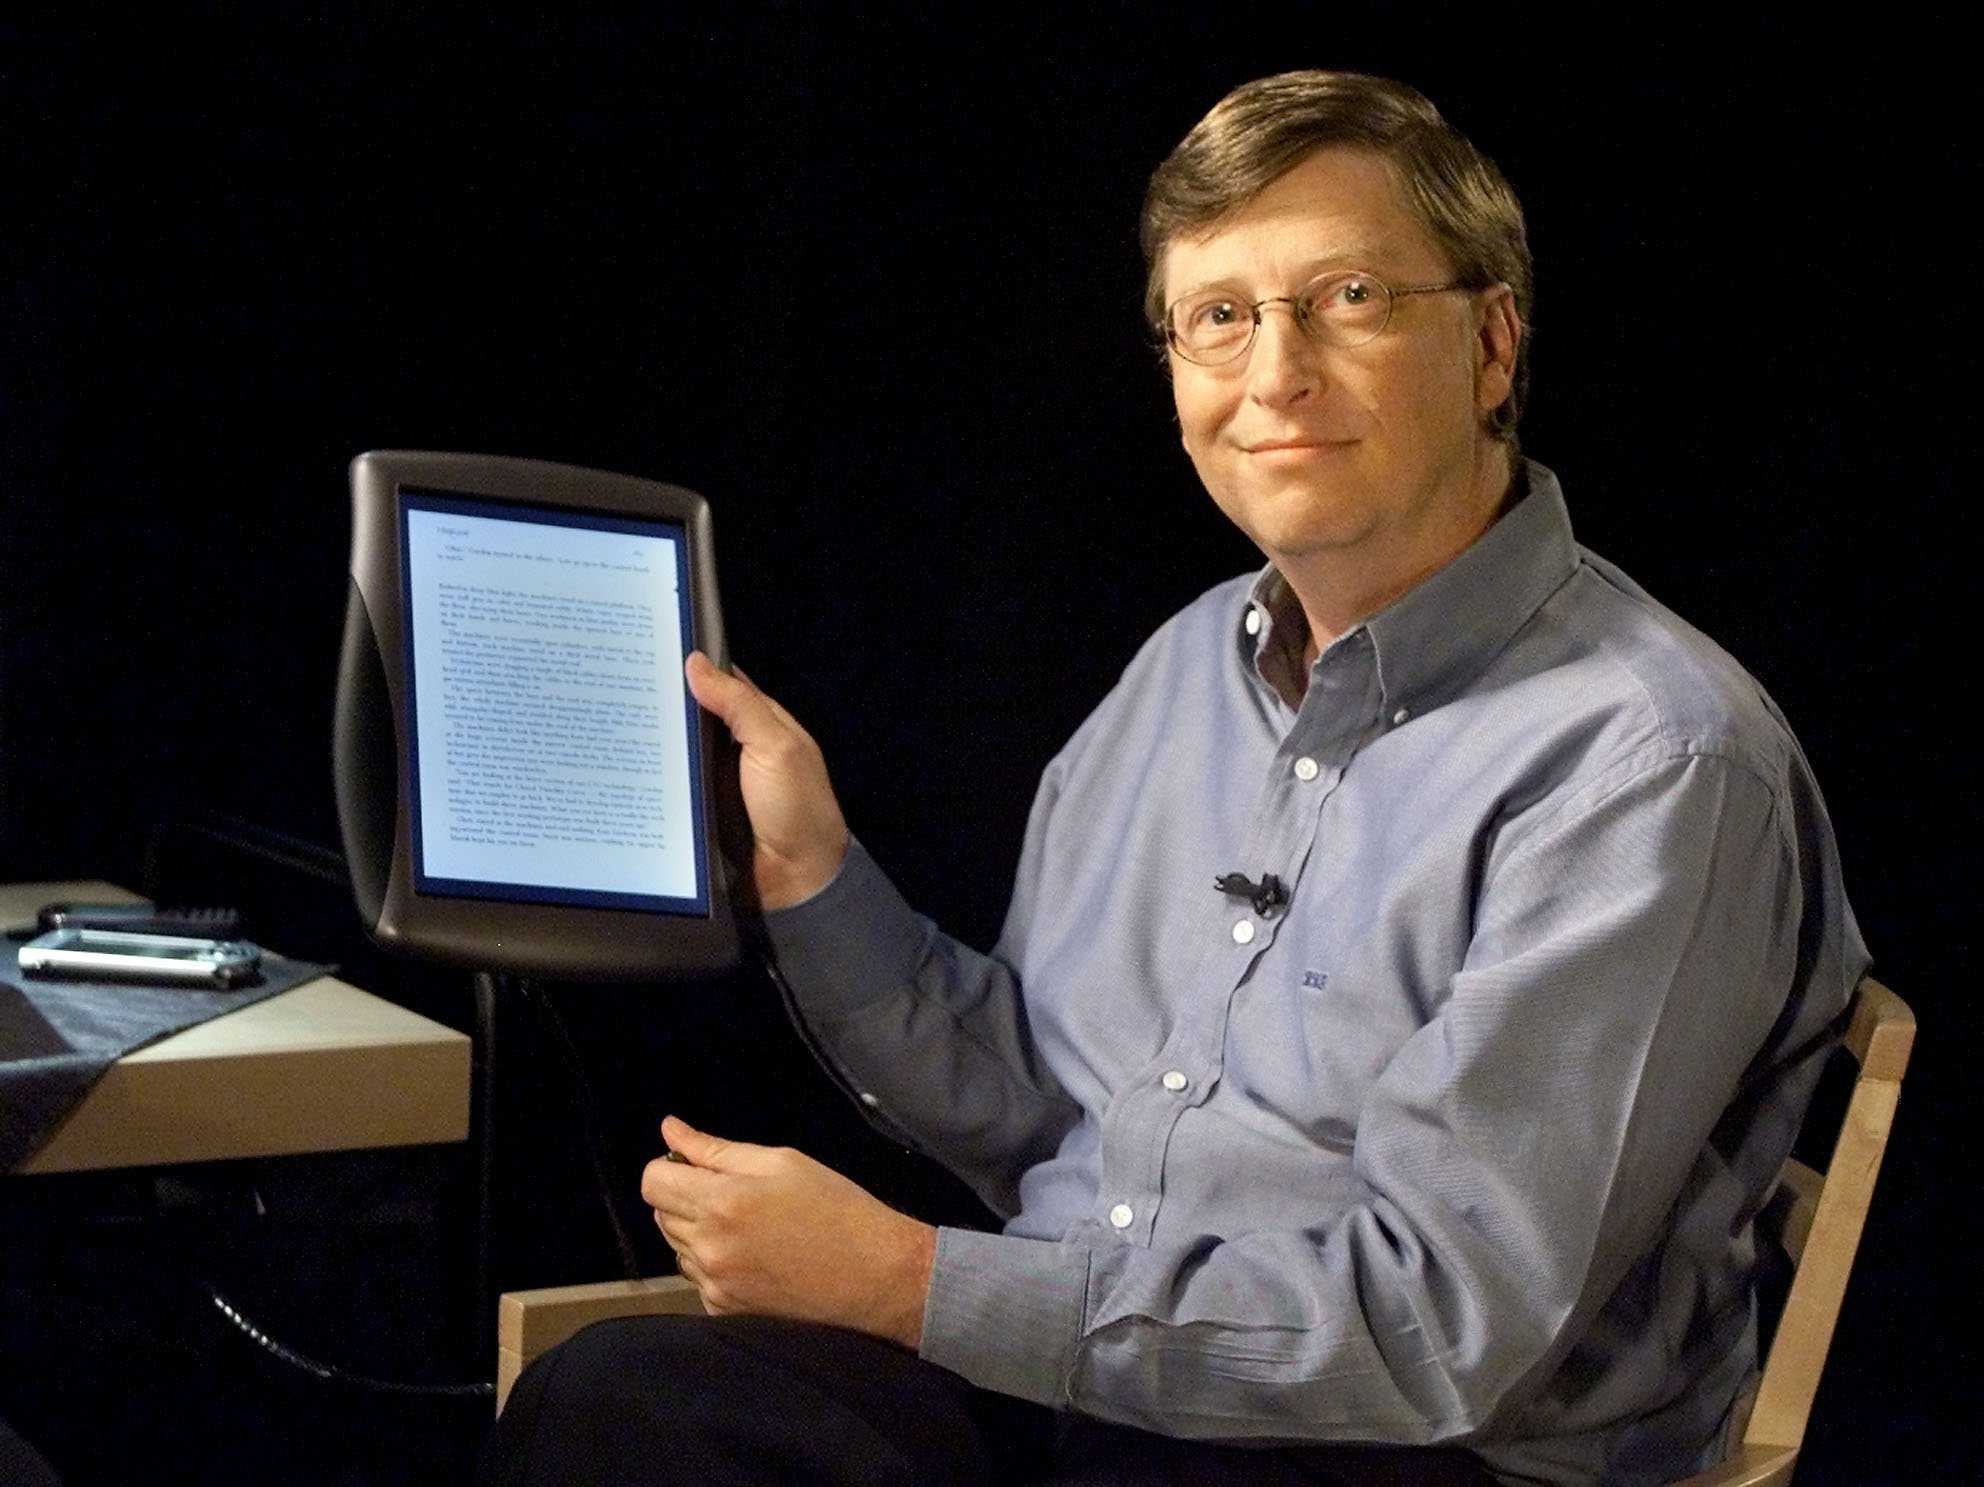 bill-gates-was-the-only-person-that-could-fire-steve-ballmer-and-it-sure-looks-like-he-did.jpg